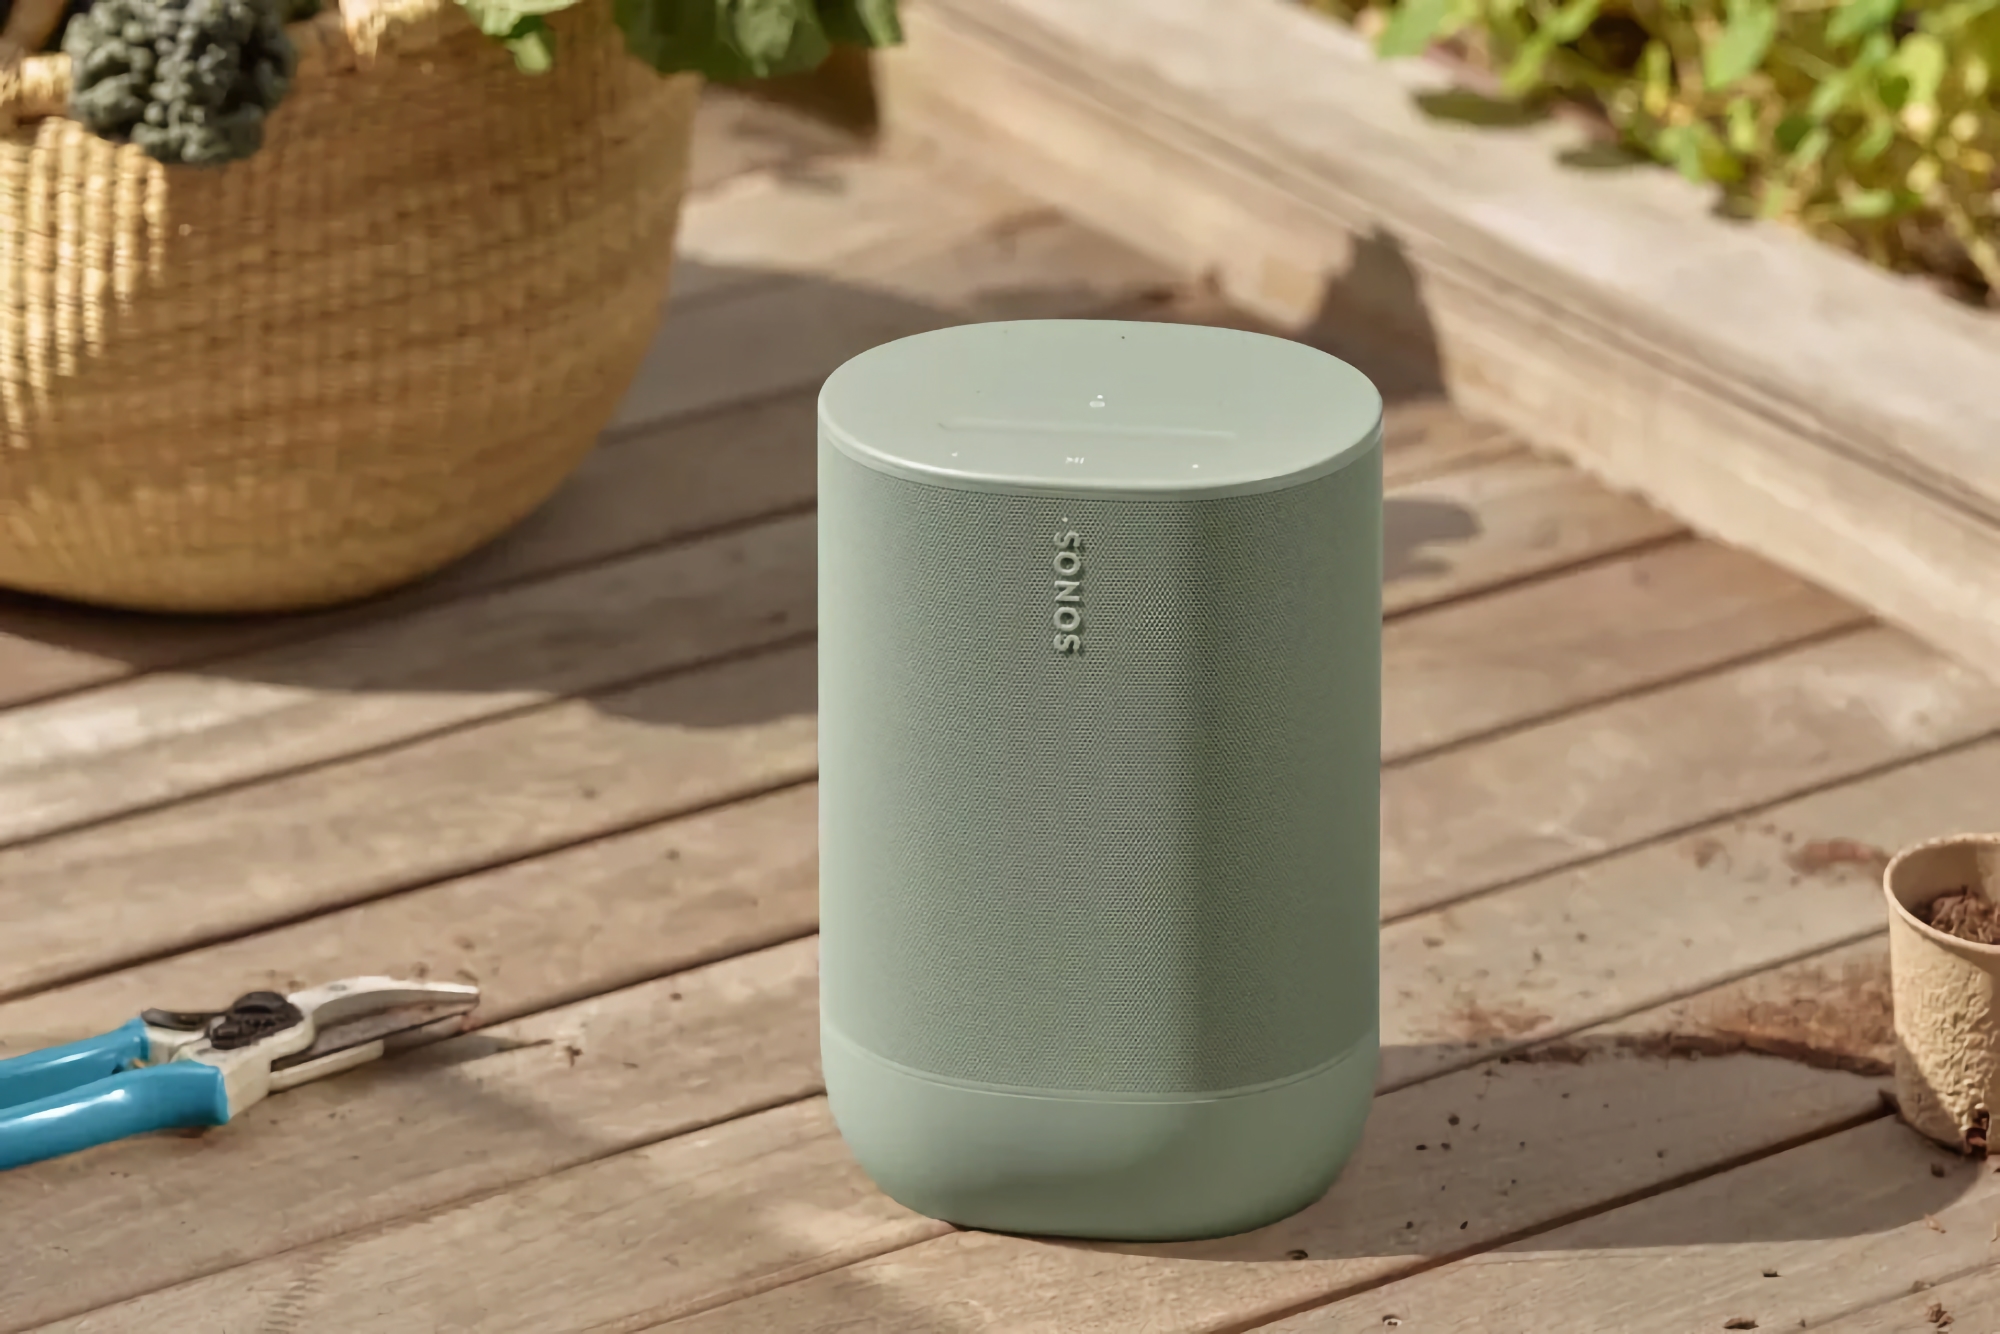 Sonos is preparing to release Move 2 smart speaker with improved sound, up to 24 hours of battery life, IP56 protection and Amazon Alexa support